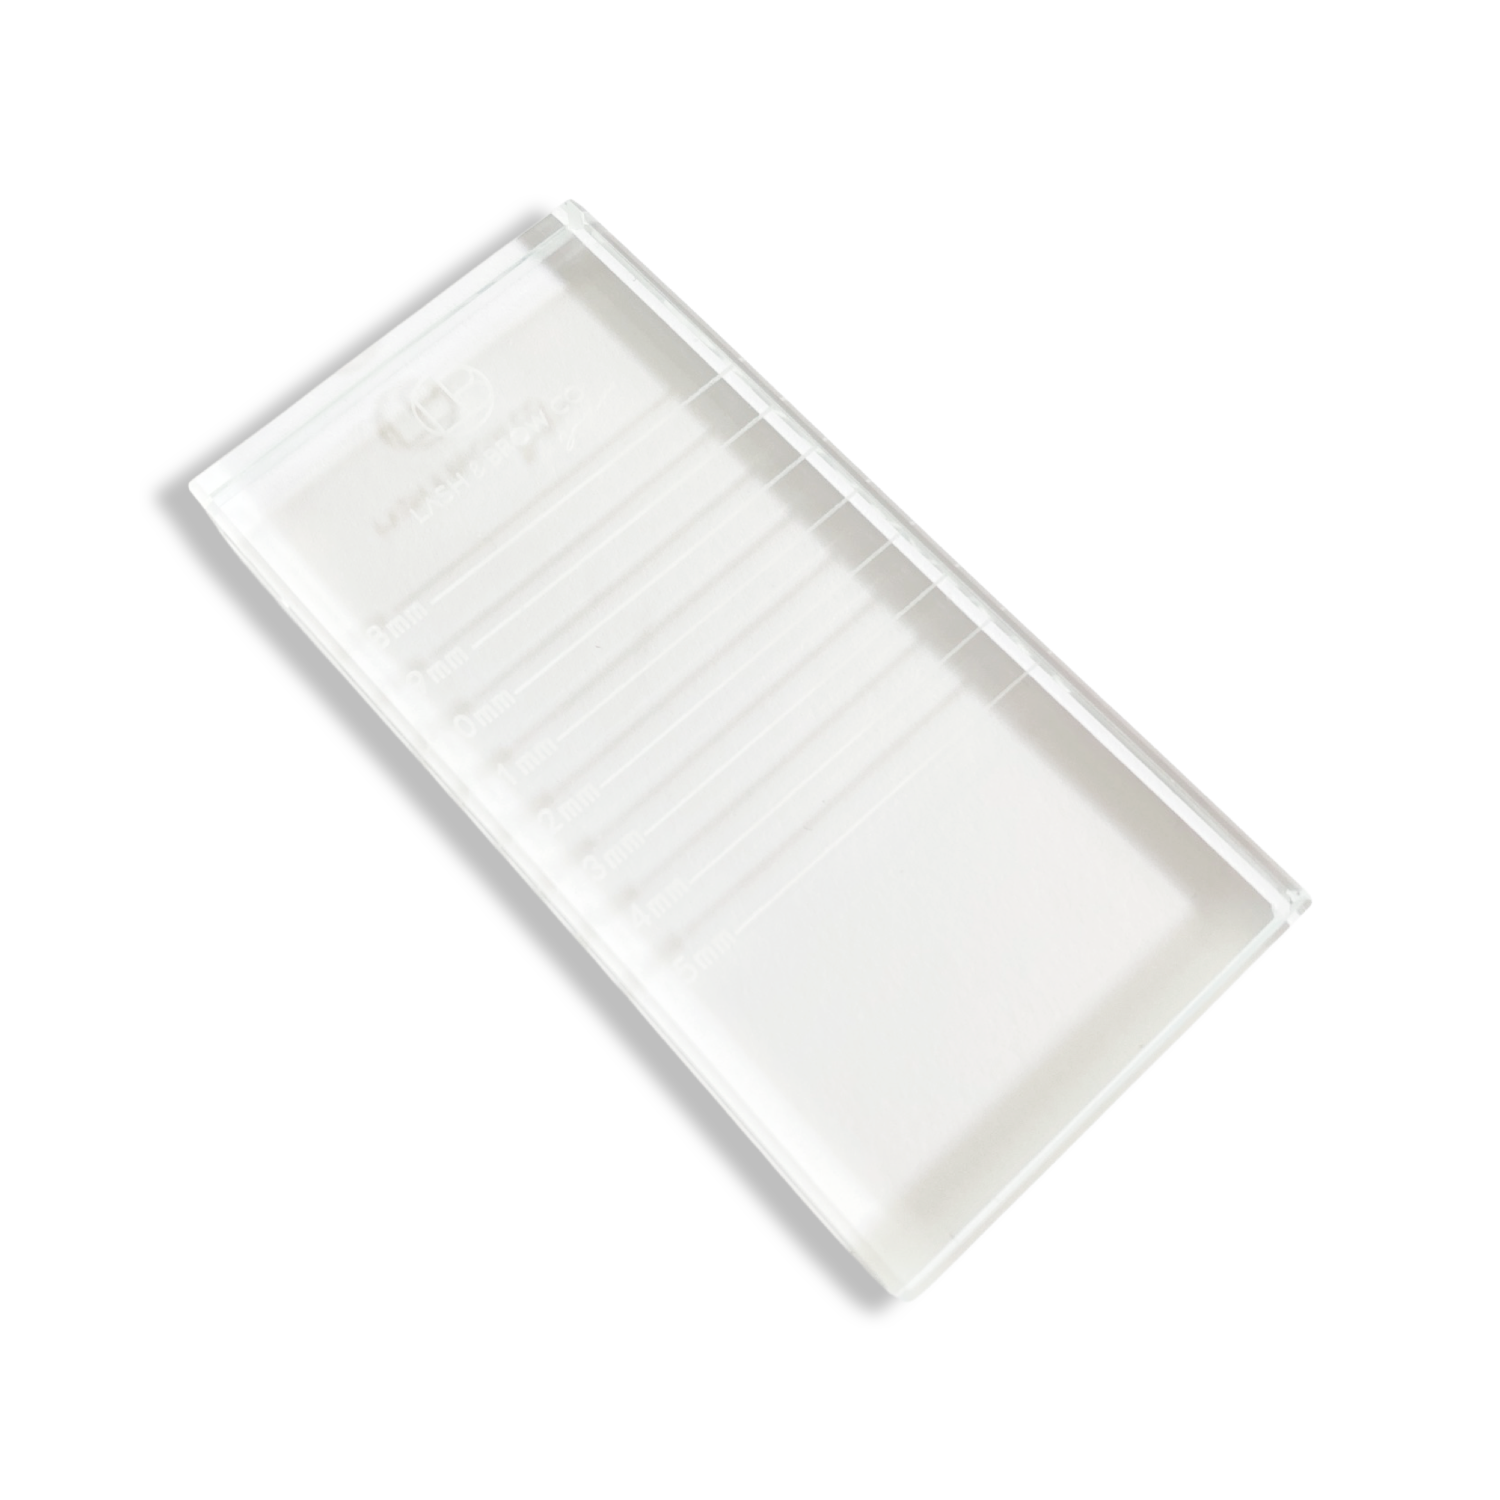 RECTANGLE GLASS TILE WITH SIZE MARKINGS